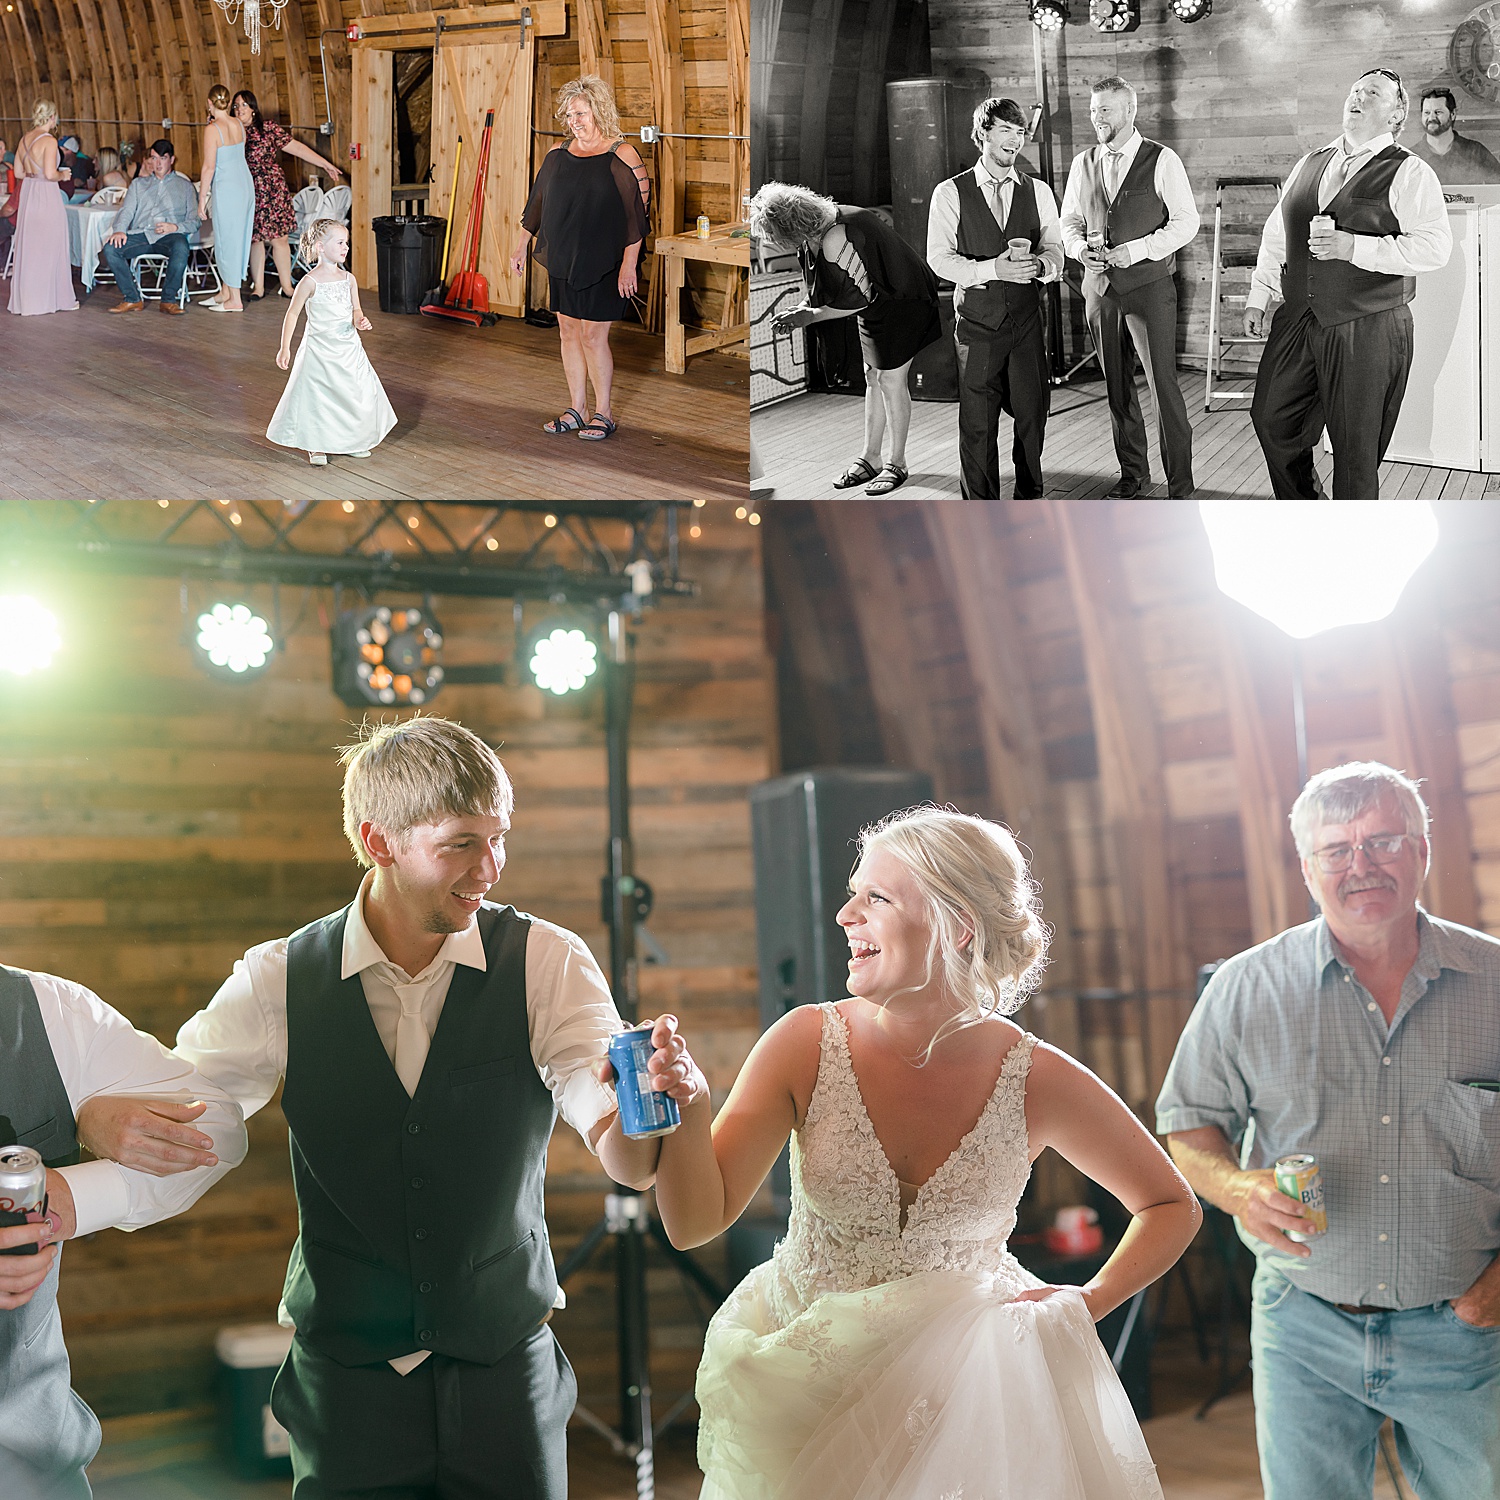 Guest dance at a fun rustic wedding in the midwest 